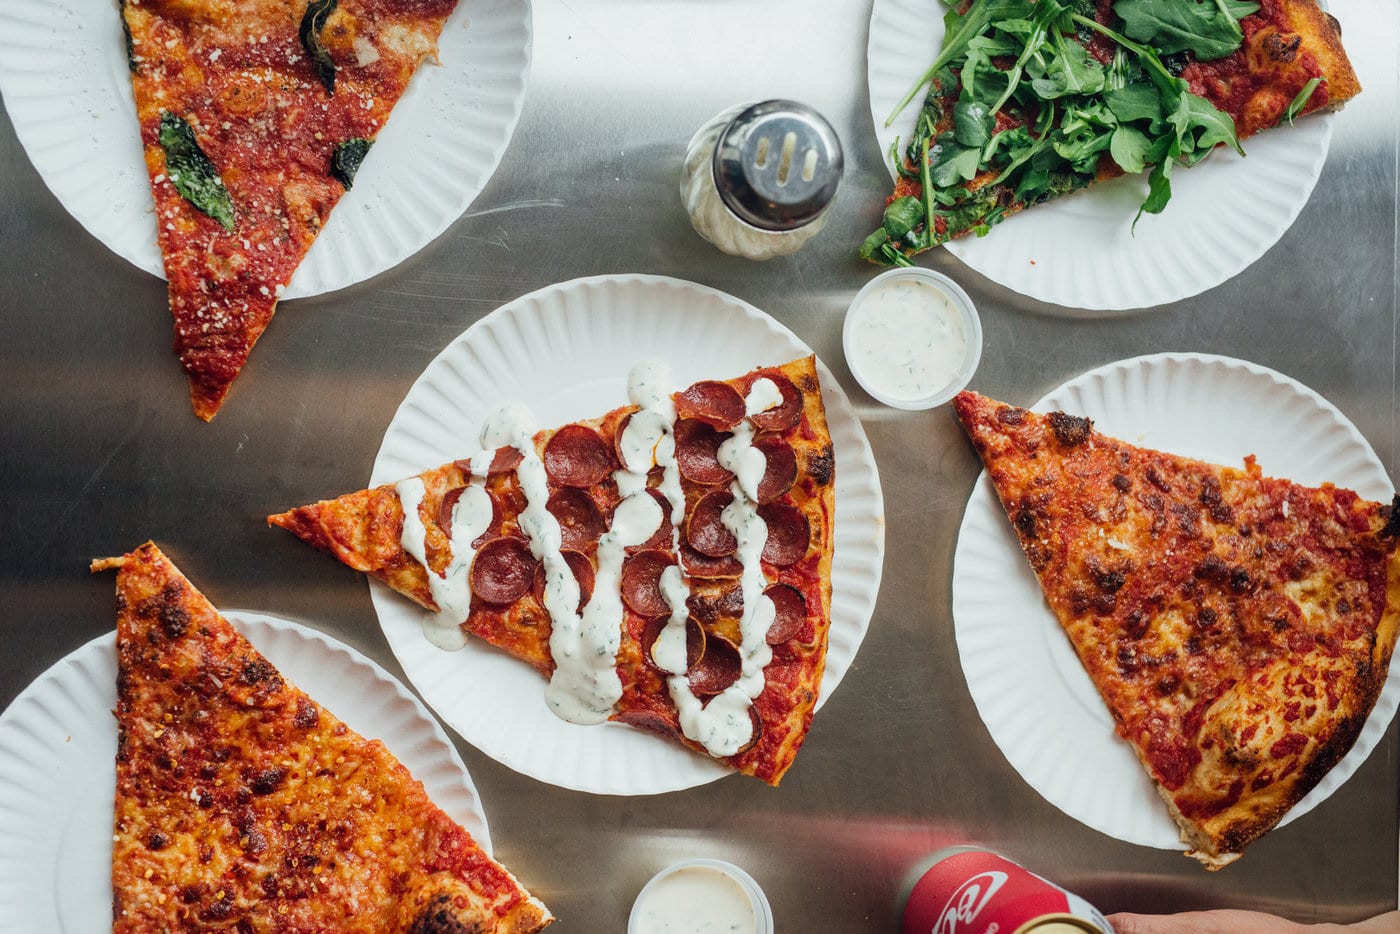 The Best Pizza in Montreal: Where to grab a great slice